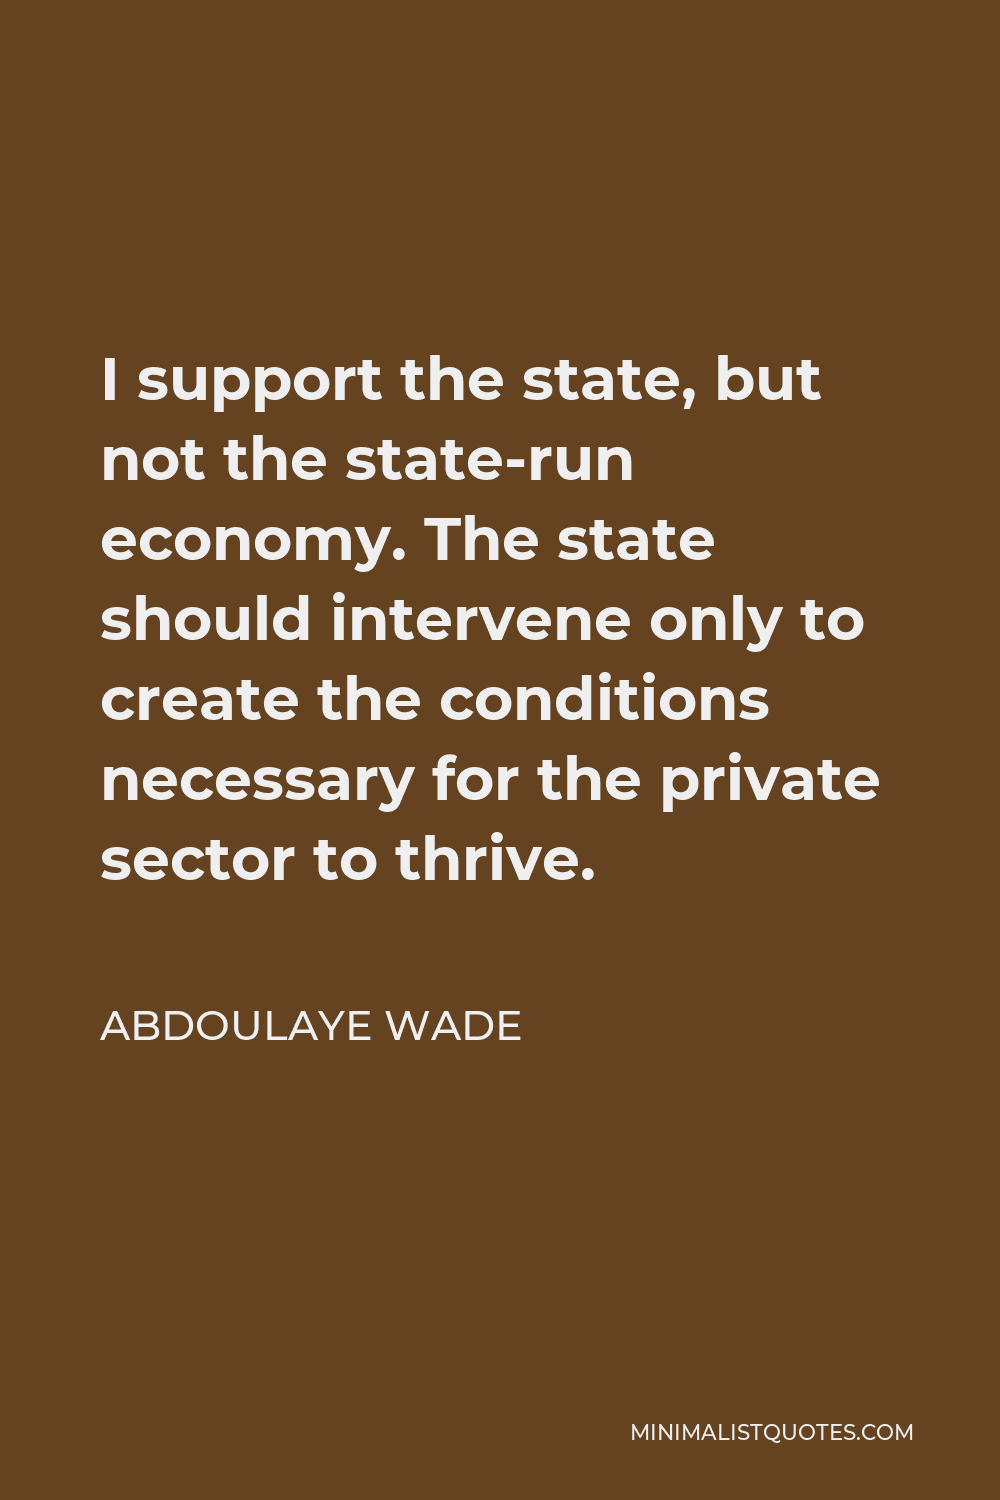 Abdoulaye Wade Quote - I support the state, but not the state-run economy. The state should intervene only to create the conditions necessary for the private sector to thrive.